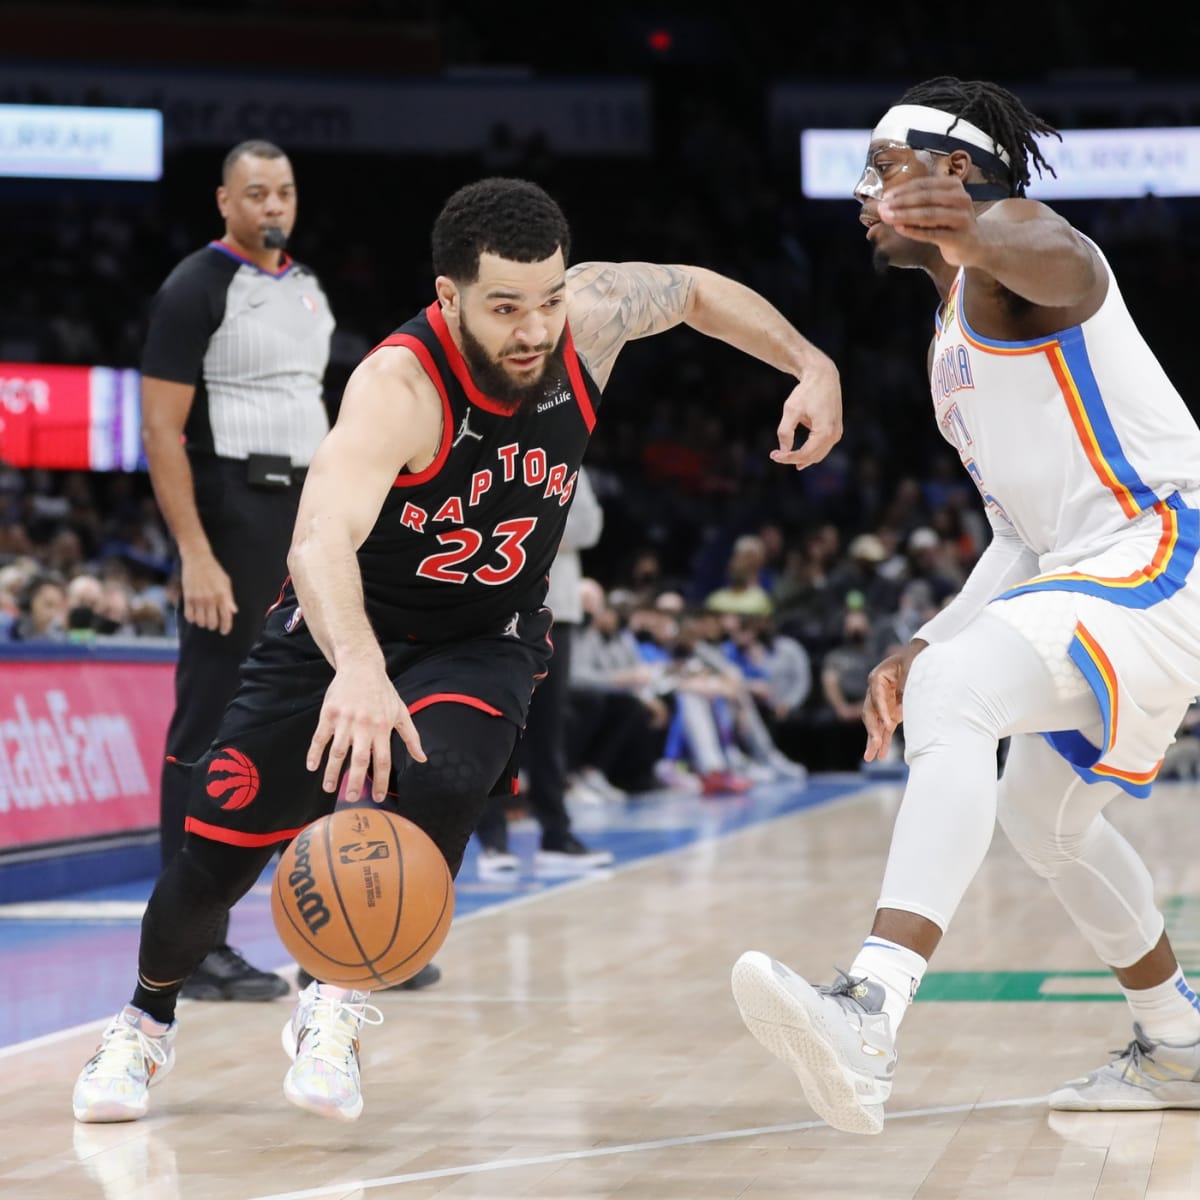 Raptors Clinch 7th Straight Playoff Berth with Win over Stephen